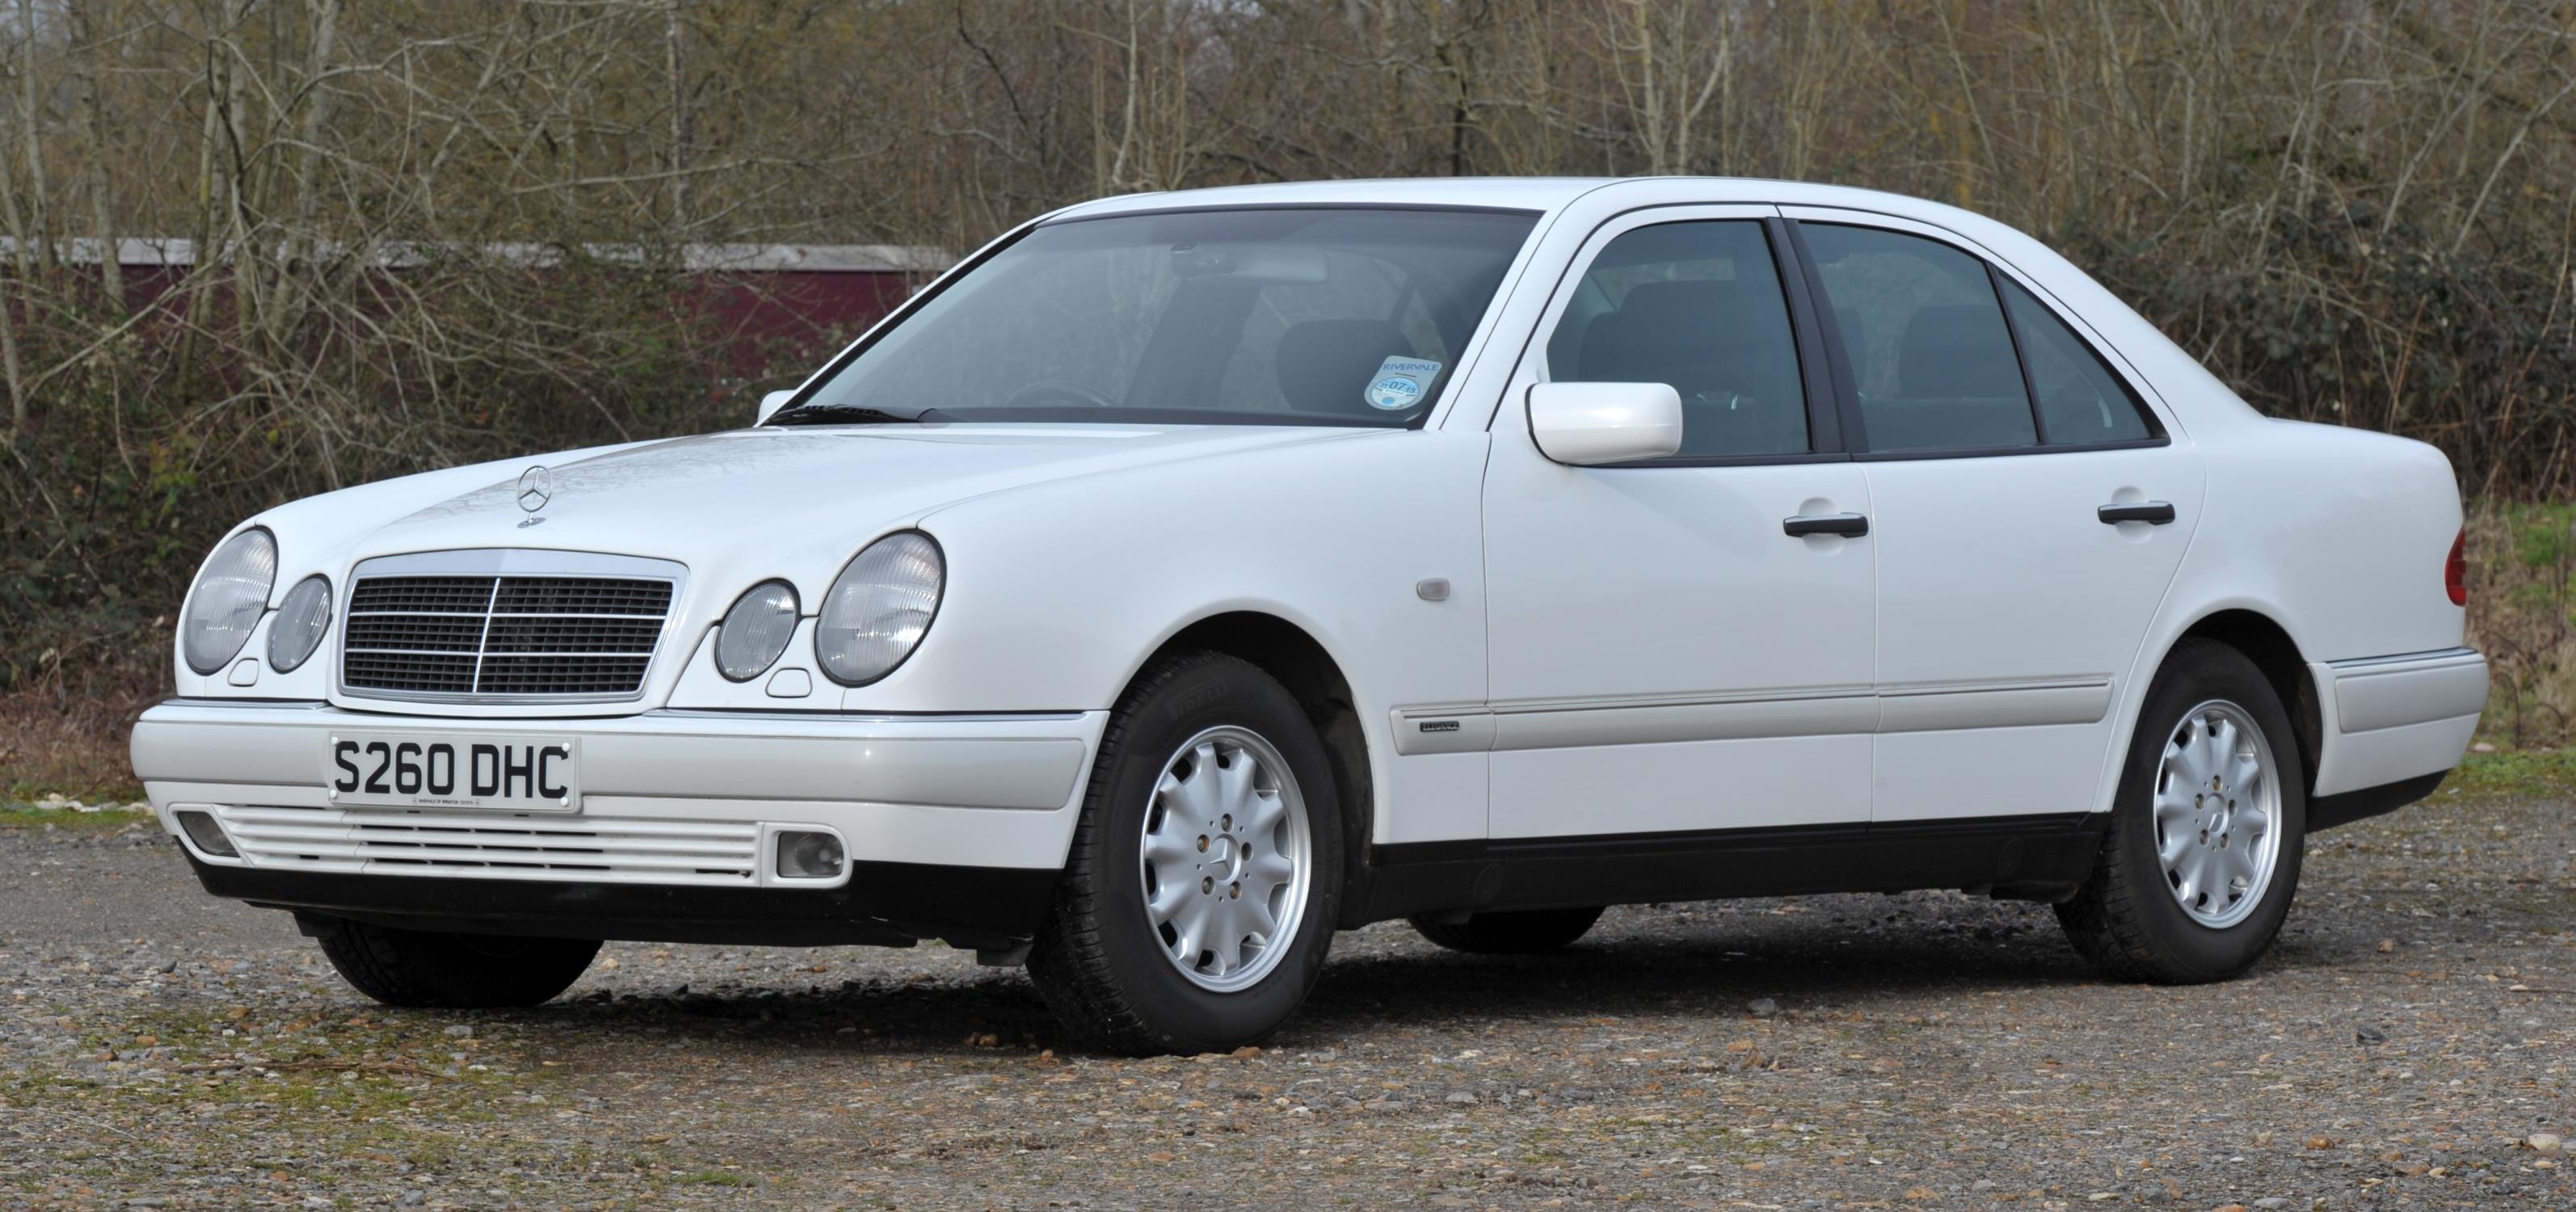 1998 Mercedes Benz E240 Elegance Saloon Petrol Automatic. Registration: S260 DHC. Mileage: 133, - Image 4 of 16